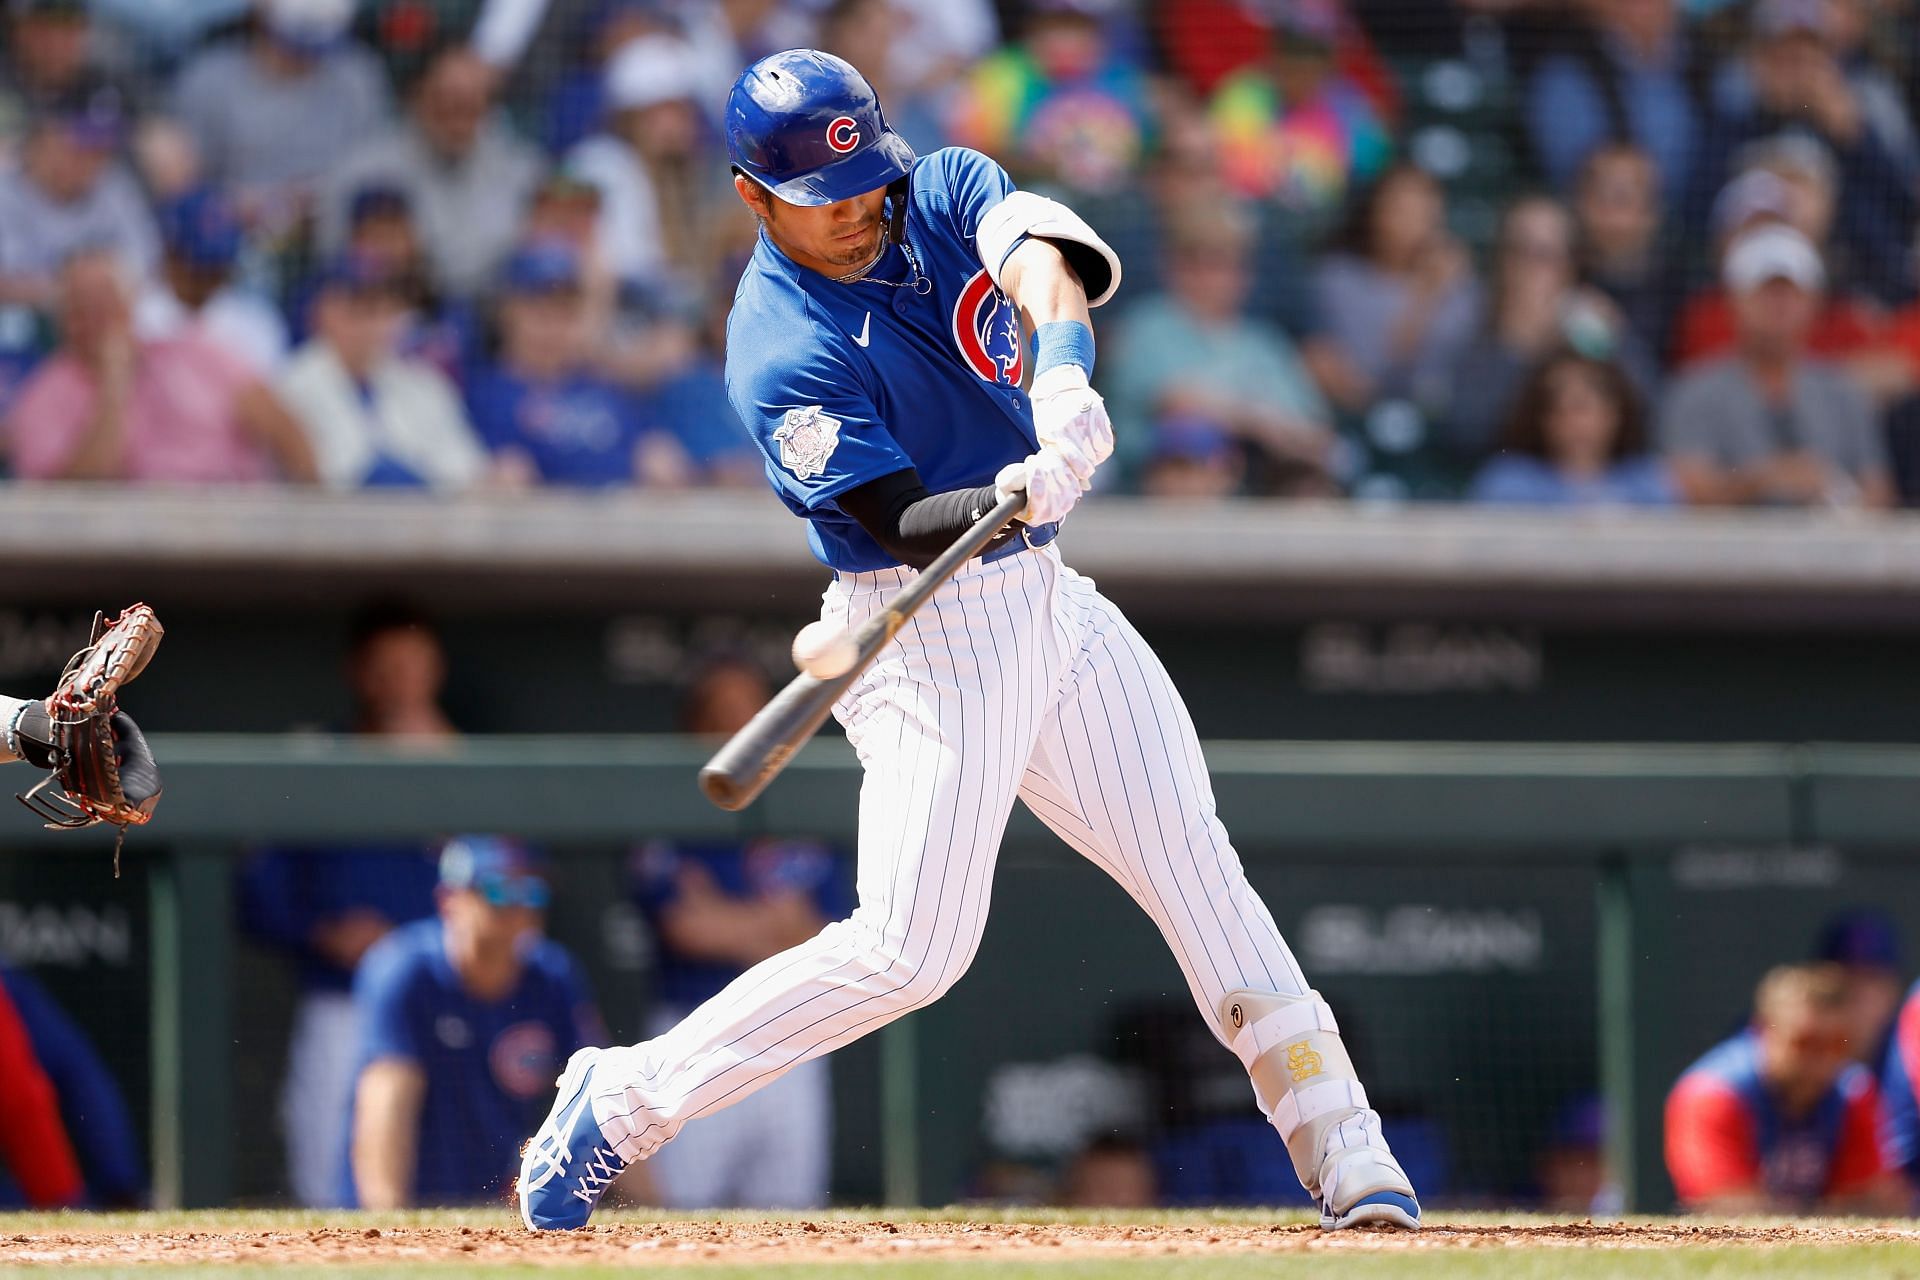 Seiya Suzuki is excited to do big things for the Chicago Cubs this year